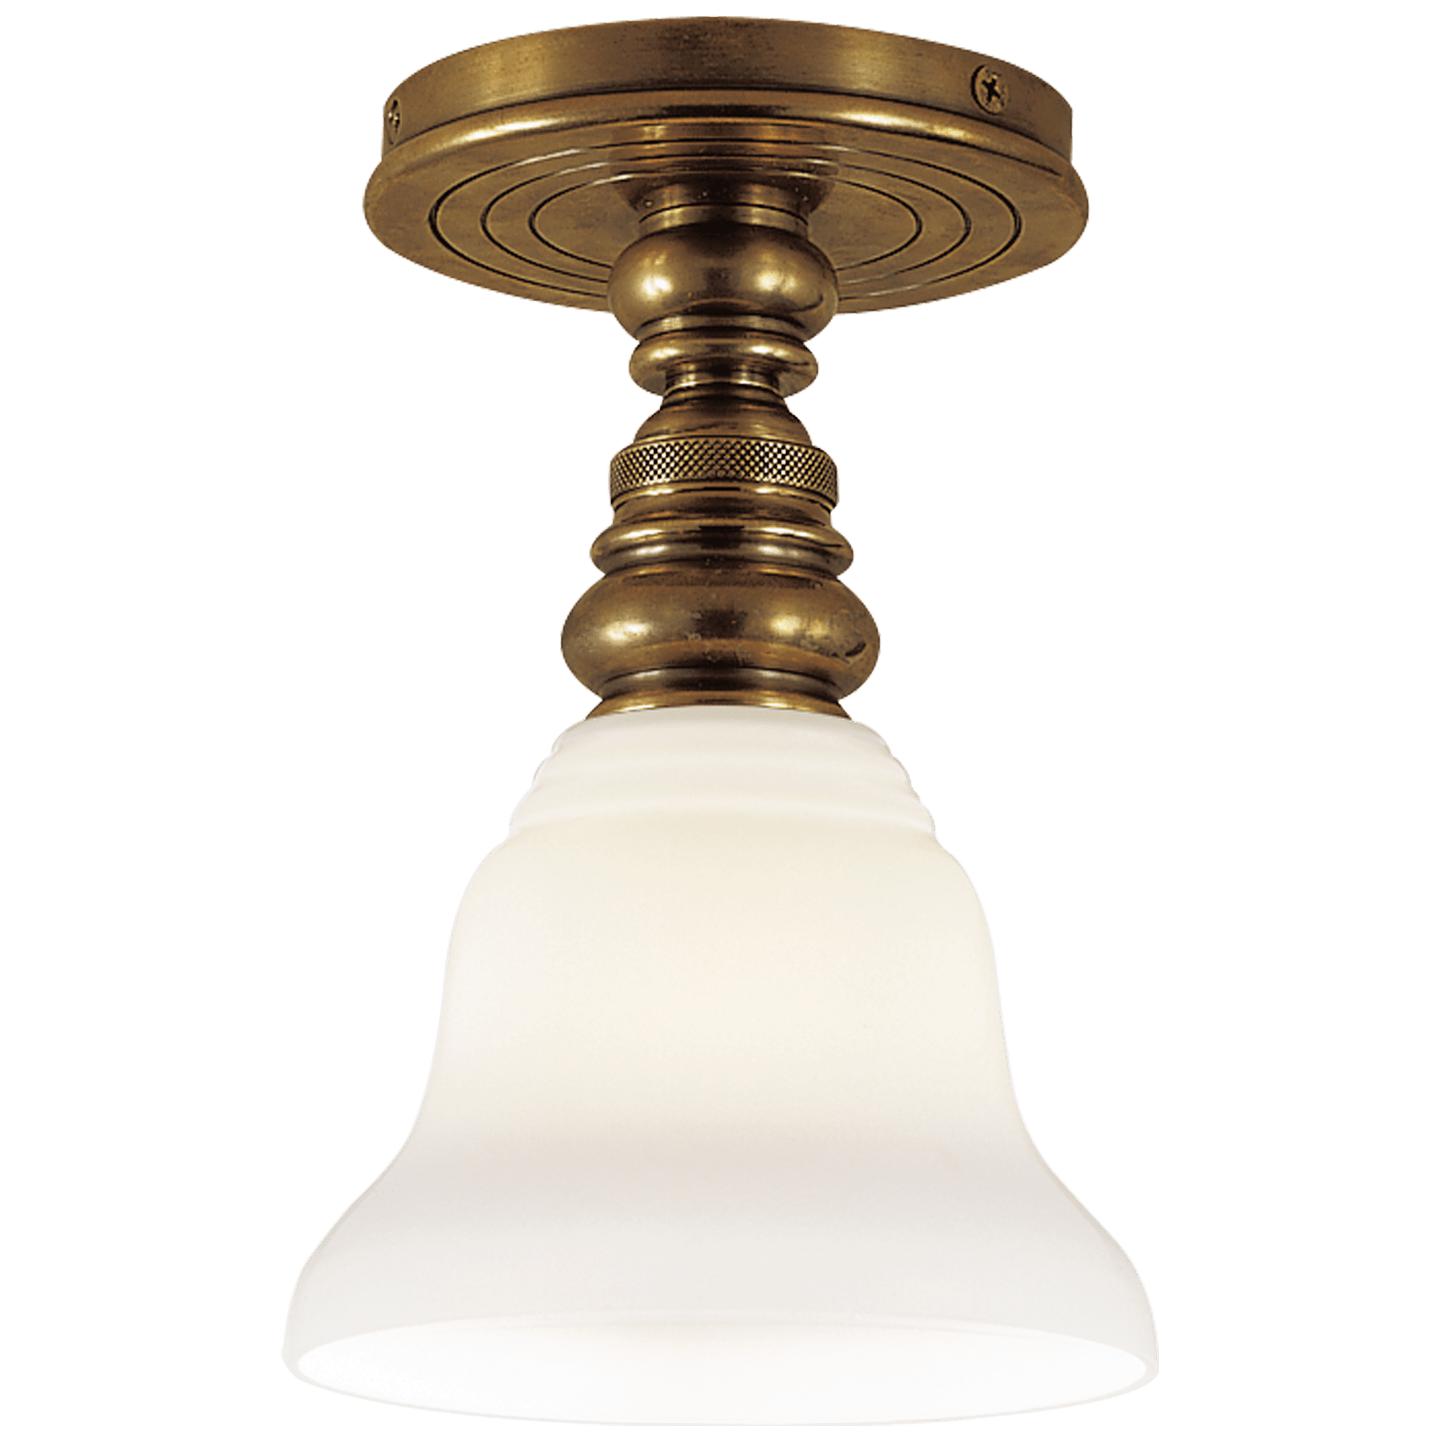 Hand-Rubbed Antique Brass White Glass Desk Shade